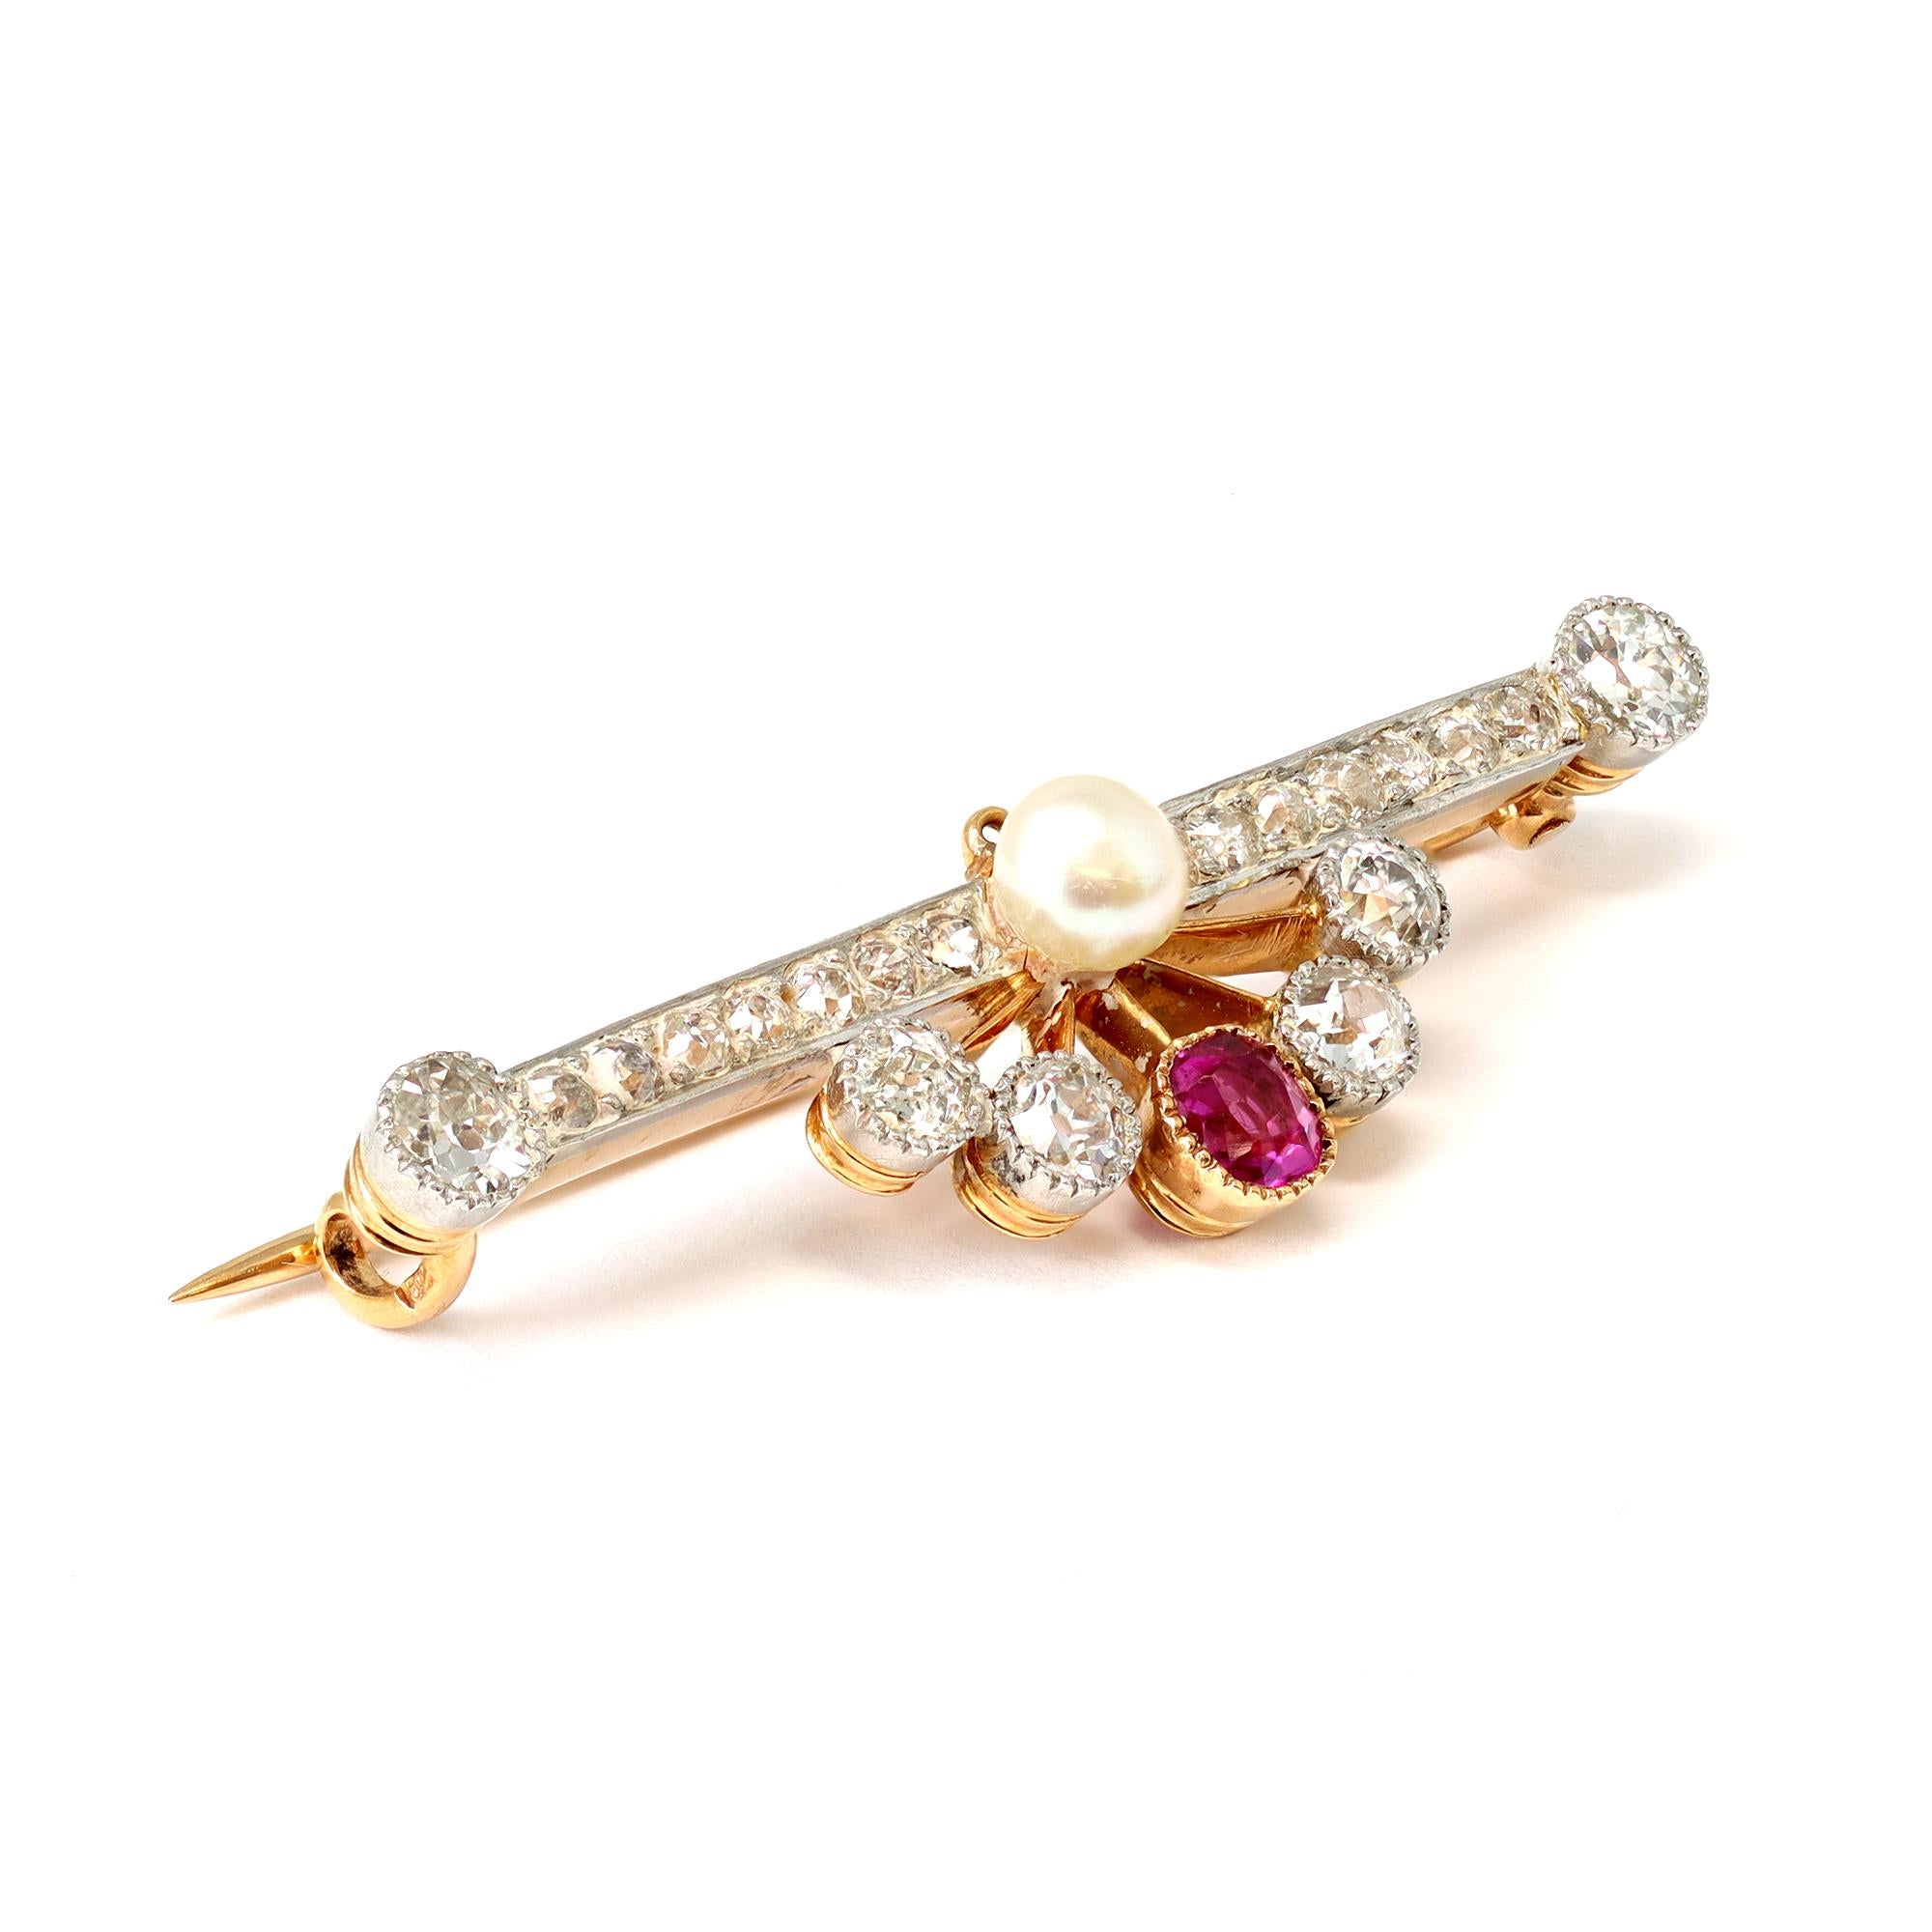 A late Victorian brooch circa 1900, featuring a cushion cut shape Burmese ruby with a strong pinkish red hue adorned with old mine cut diamonds. The ruby has an estimated weight of 0.40 carats, the diamonds weigh approximately 1.40 carats GH color